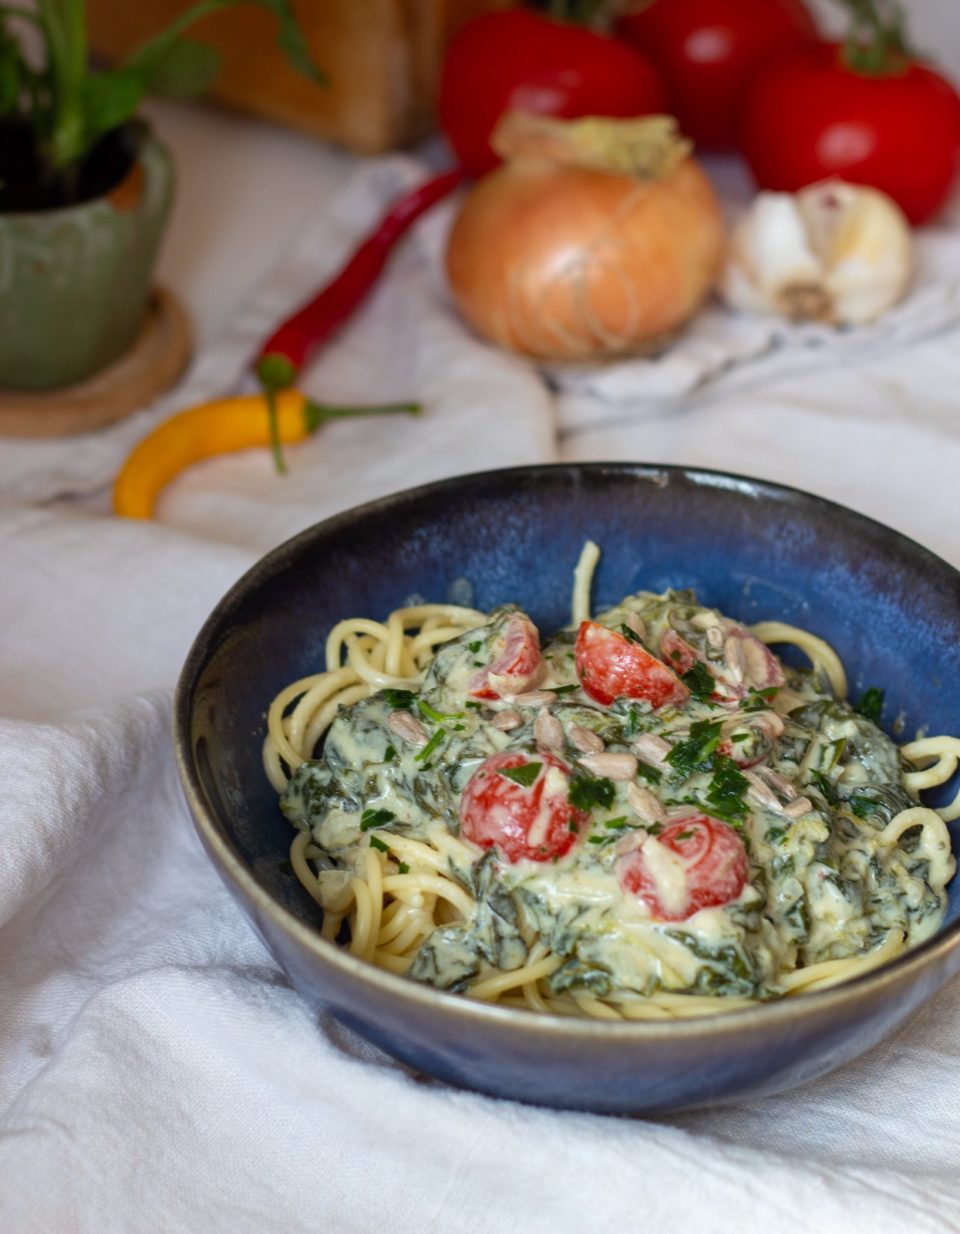 Nudeln in Gorgonzola-Sauce – Can I have it?